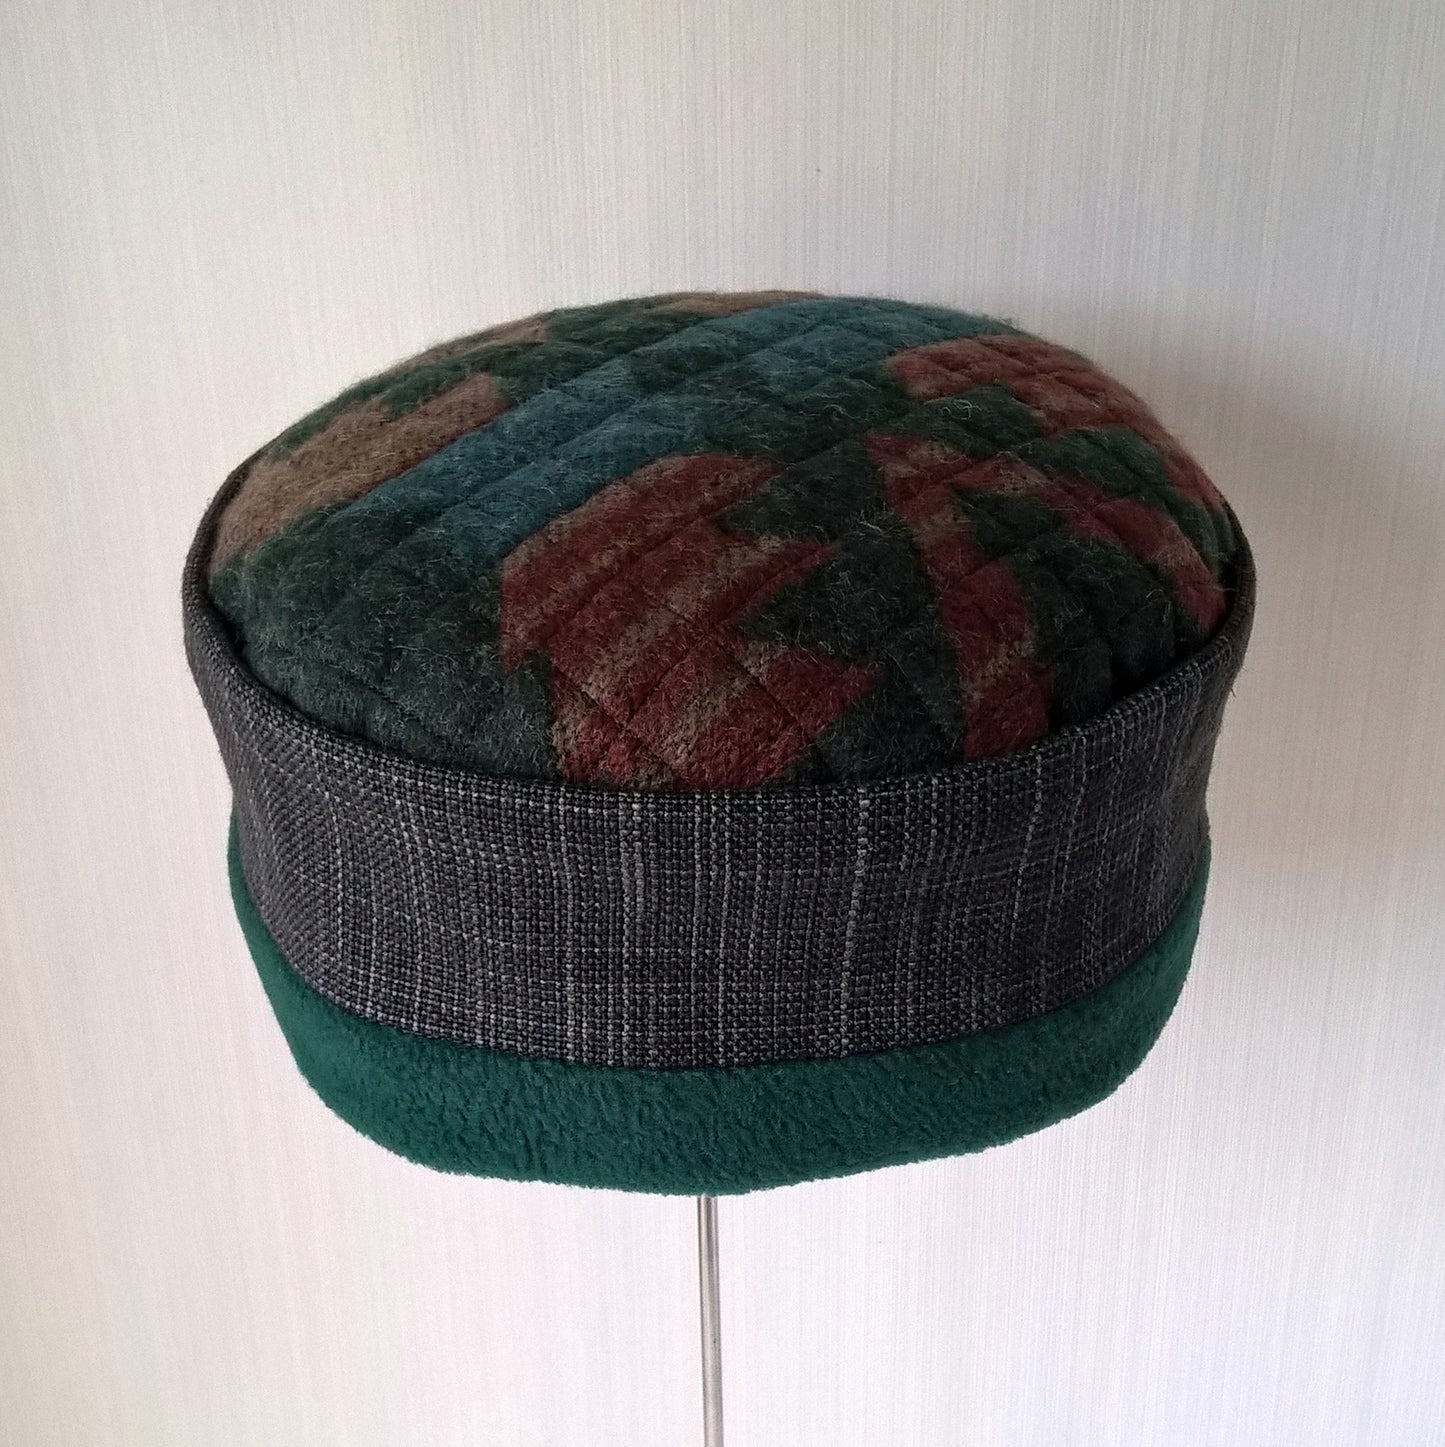 Brimless cap in Aztec design with forest green fleece lining